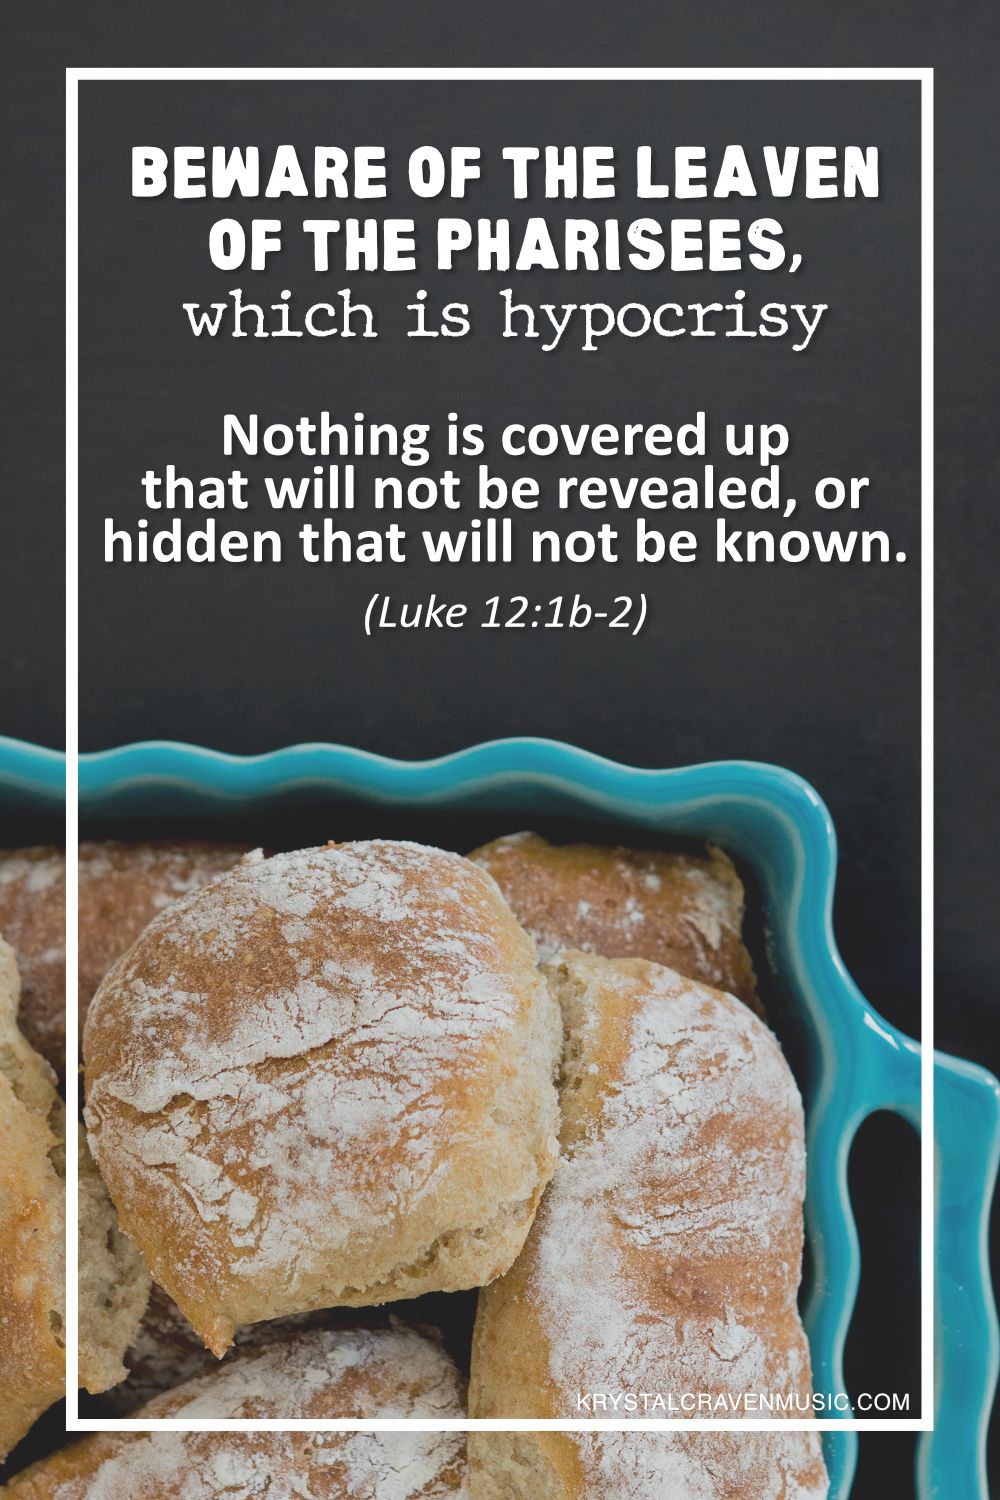 The text from Luke 12:1b-2 "Beware of the leaven of the Pharisees, which is hypocrisy. Nothing is covered up that will not be revealed, or hidden that will not be known" over a picture of a picture of bread rolls in a turquoise dish.